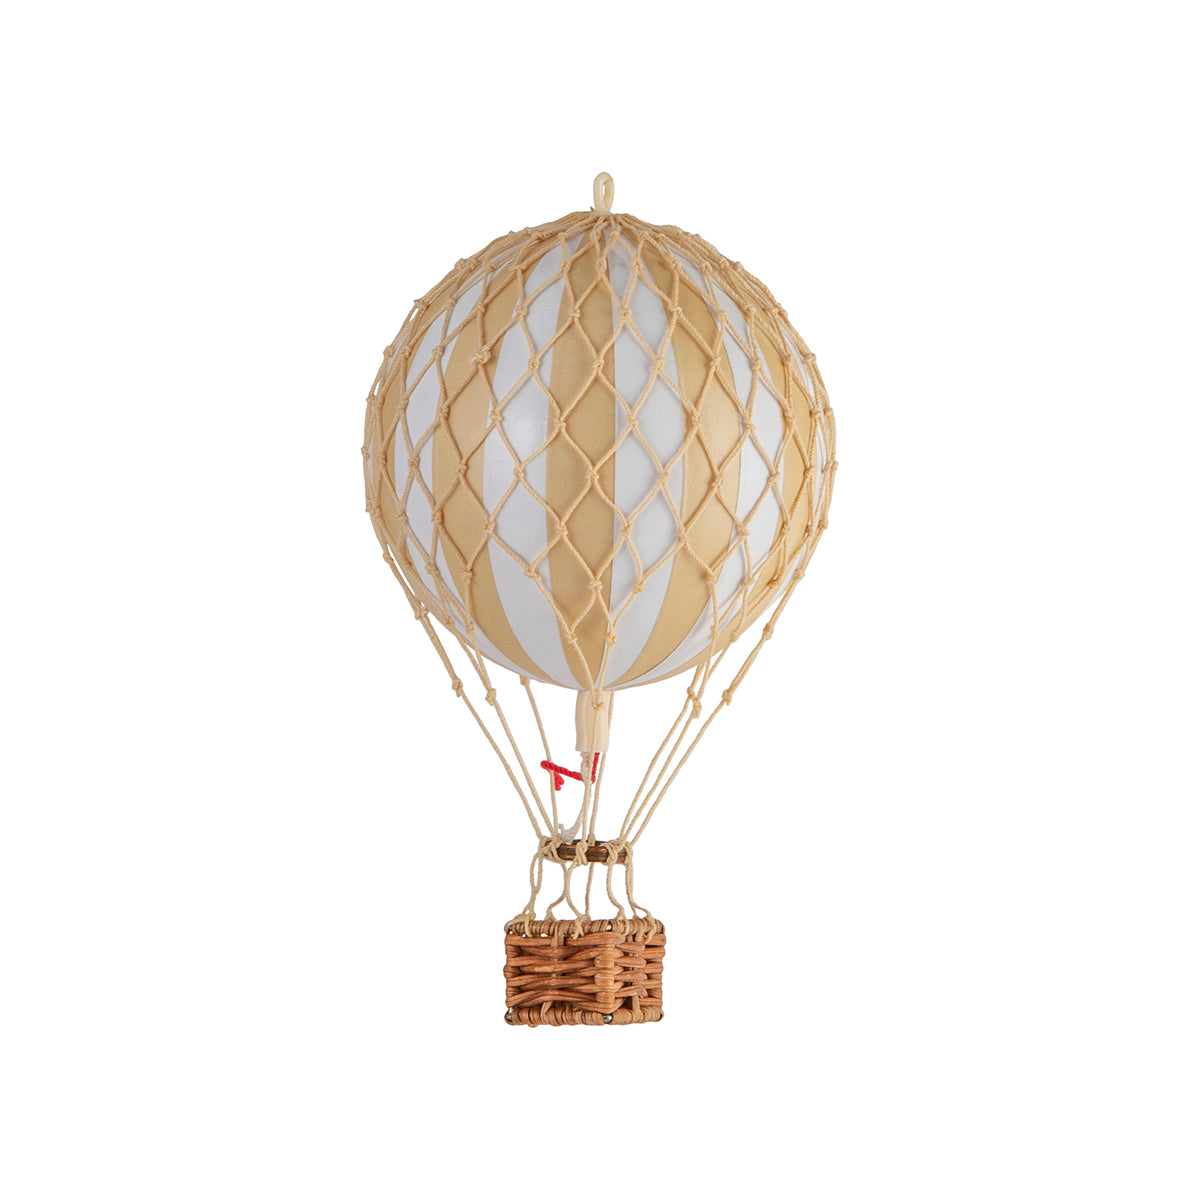 A whimsical Wonderen Extra Small Hot Air Balloon - Floating The Skies on a white background.